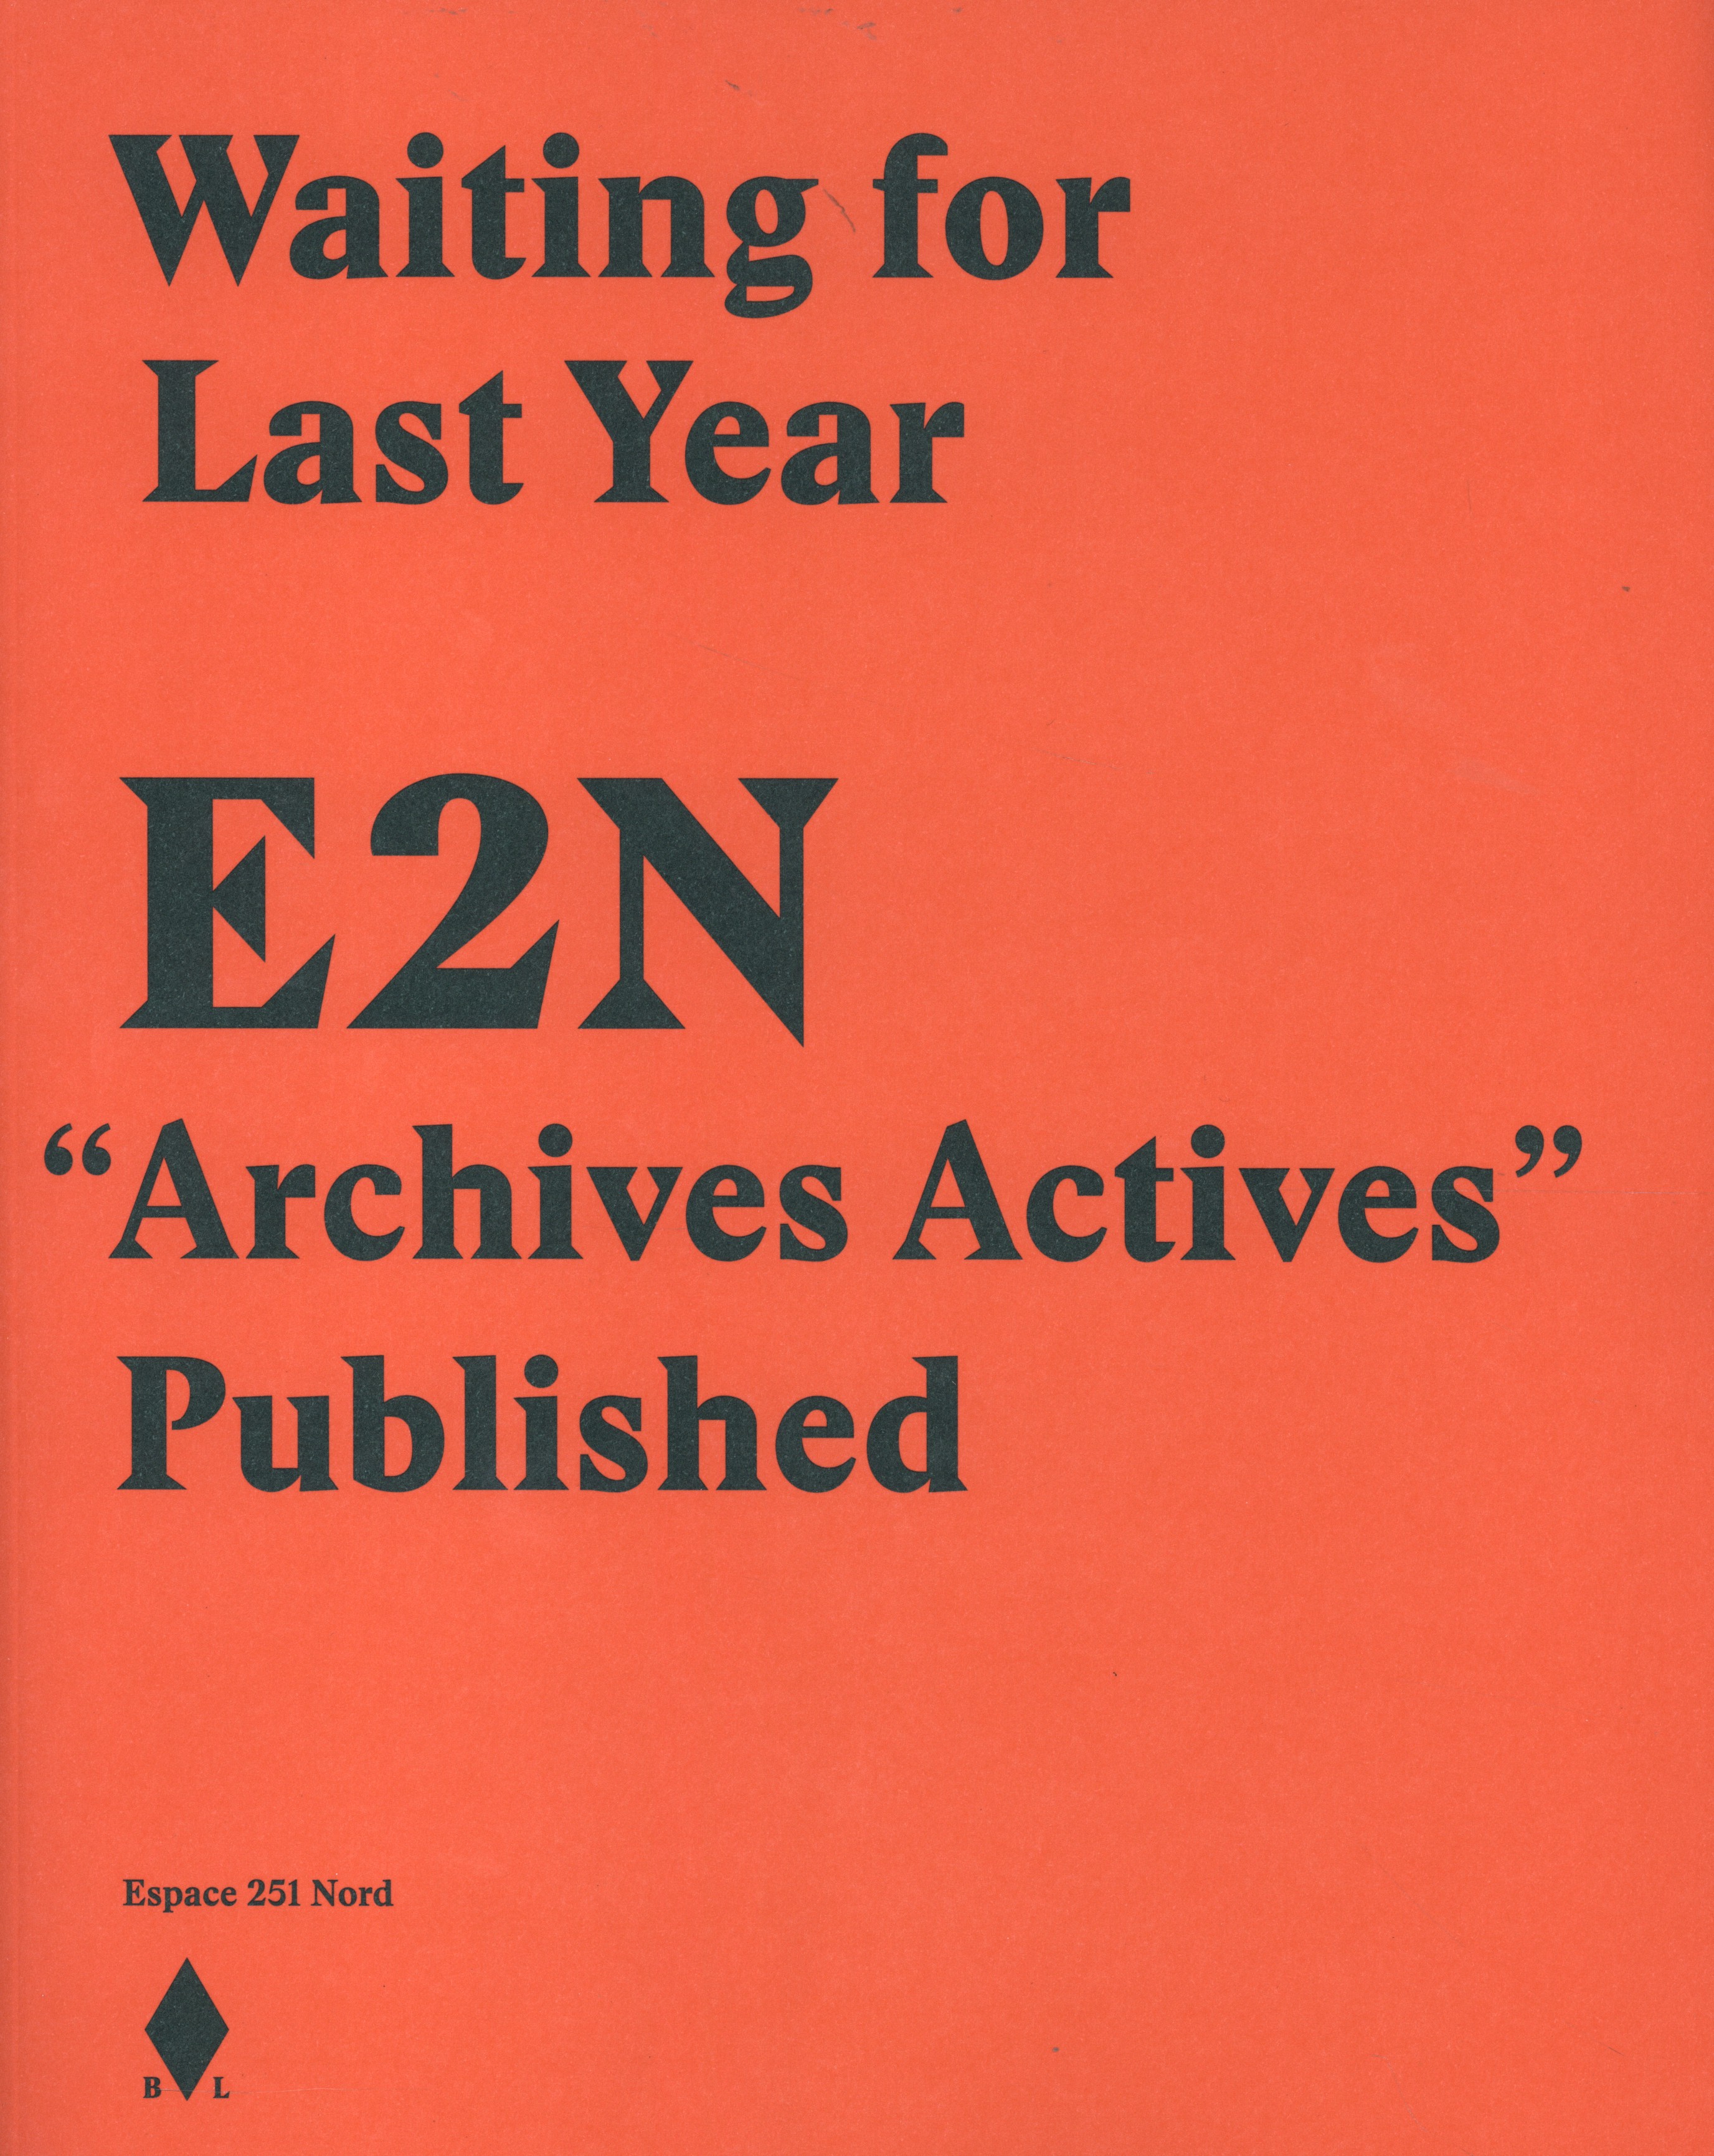 Waiting for Last Year E2N "Archives Actives" Published